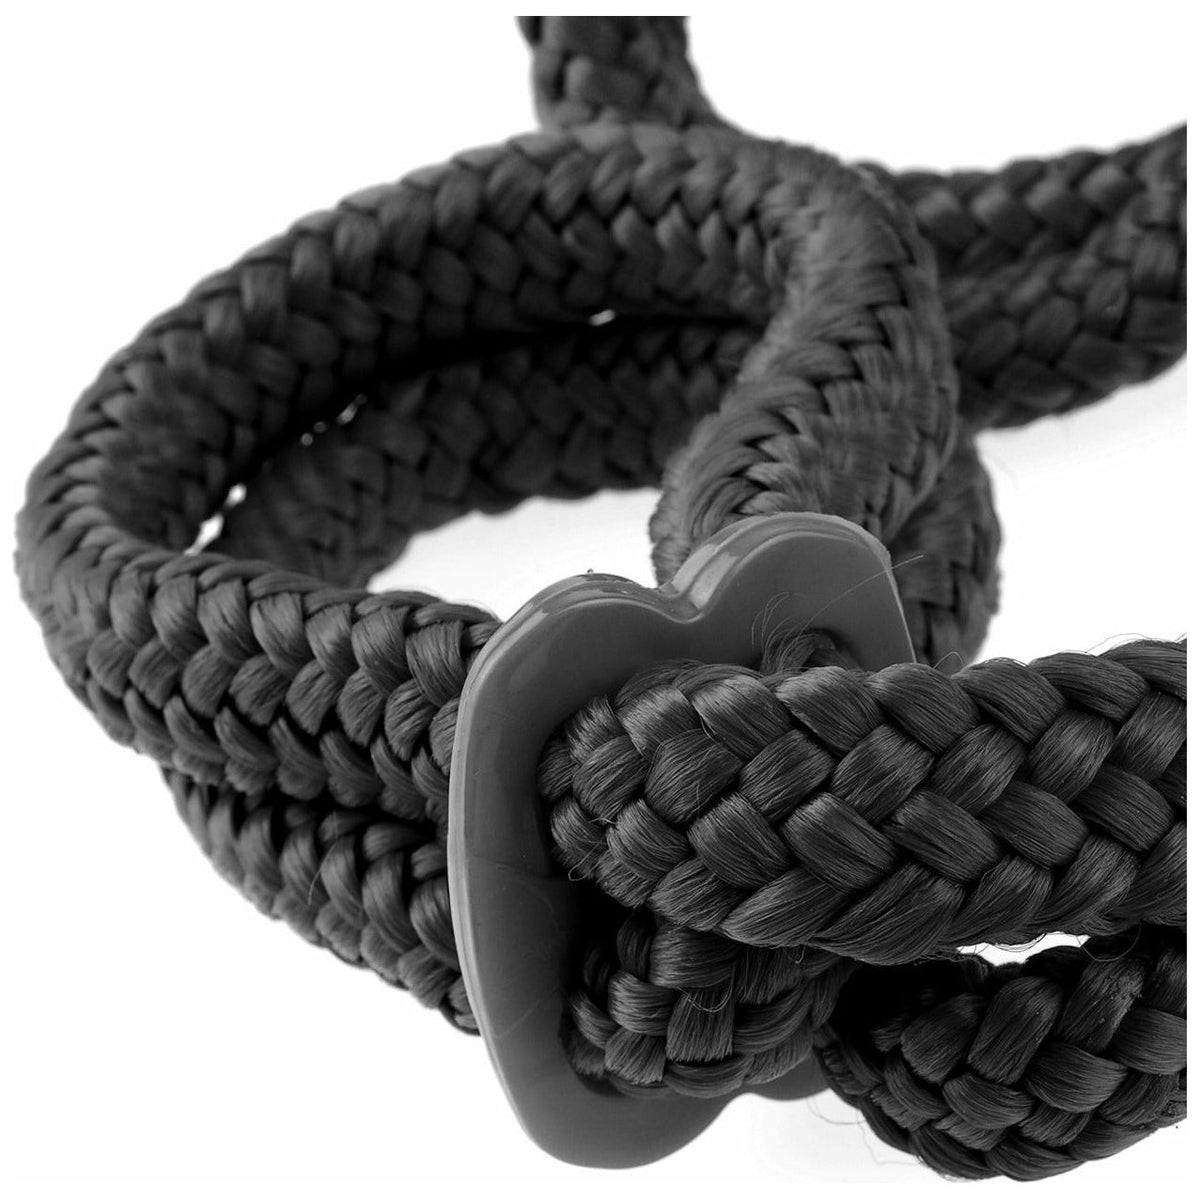 Pipedream Products Fetish Fantasy Series Silk Rope Love Cuffs - Black